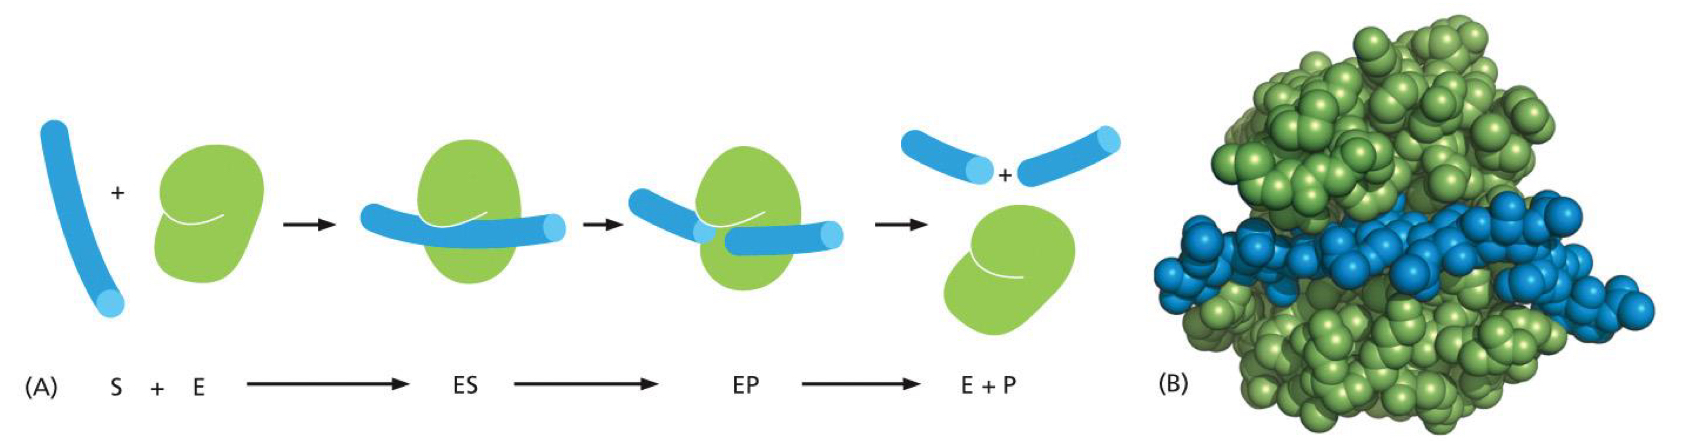 <p>an enzyme that cleaves the polysaccharide chains that form the cell walls of bacteria</p>